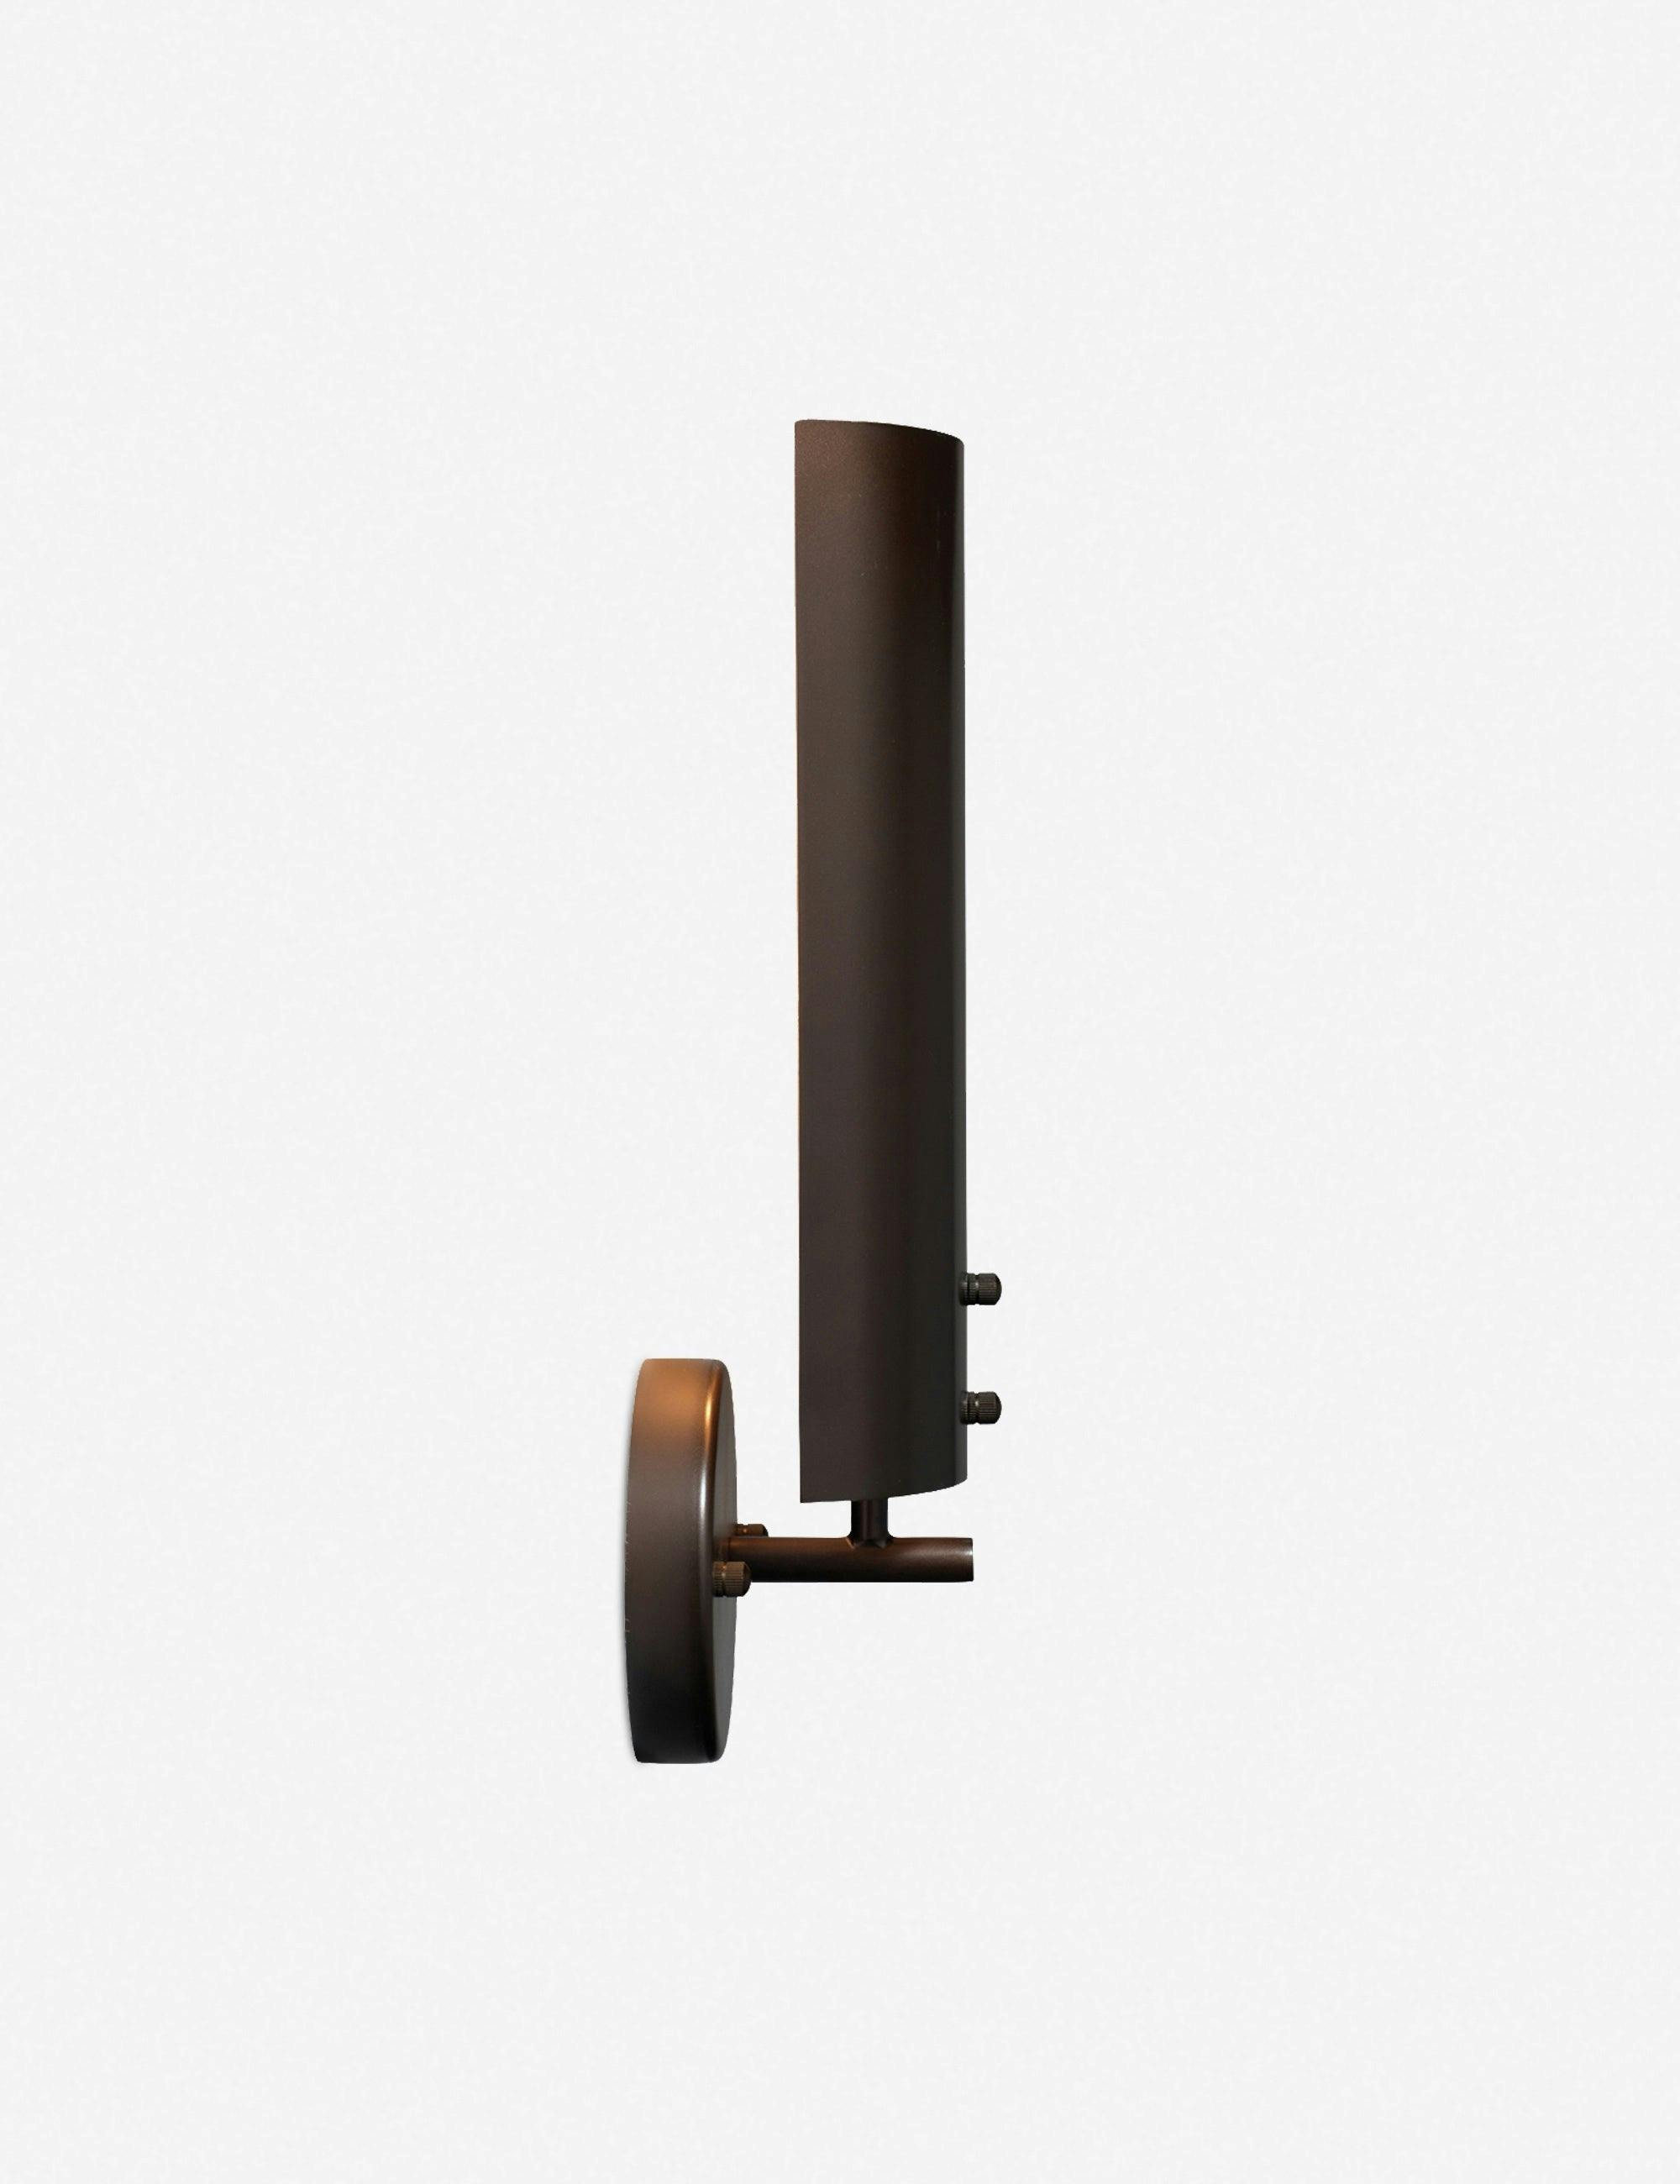 Elegant Oil-Rubbed Bronze 1-Light Wall Sconce with Candelabra Bulb